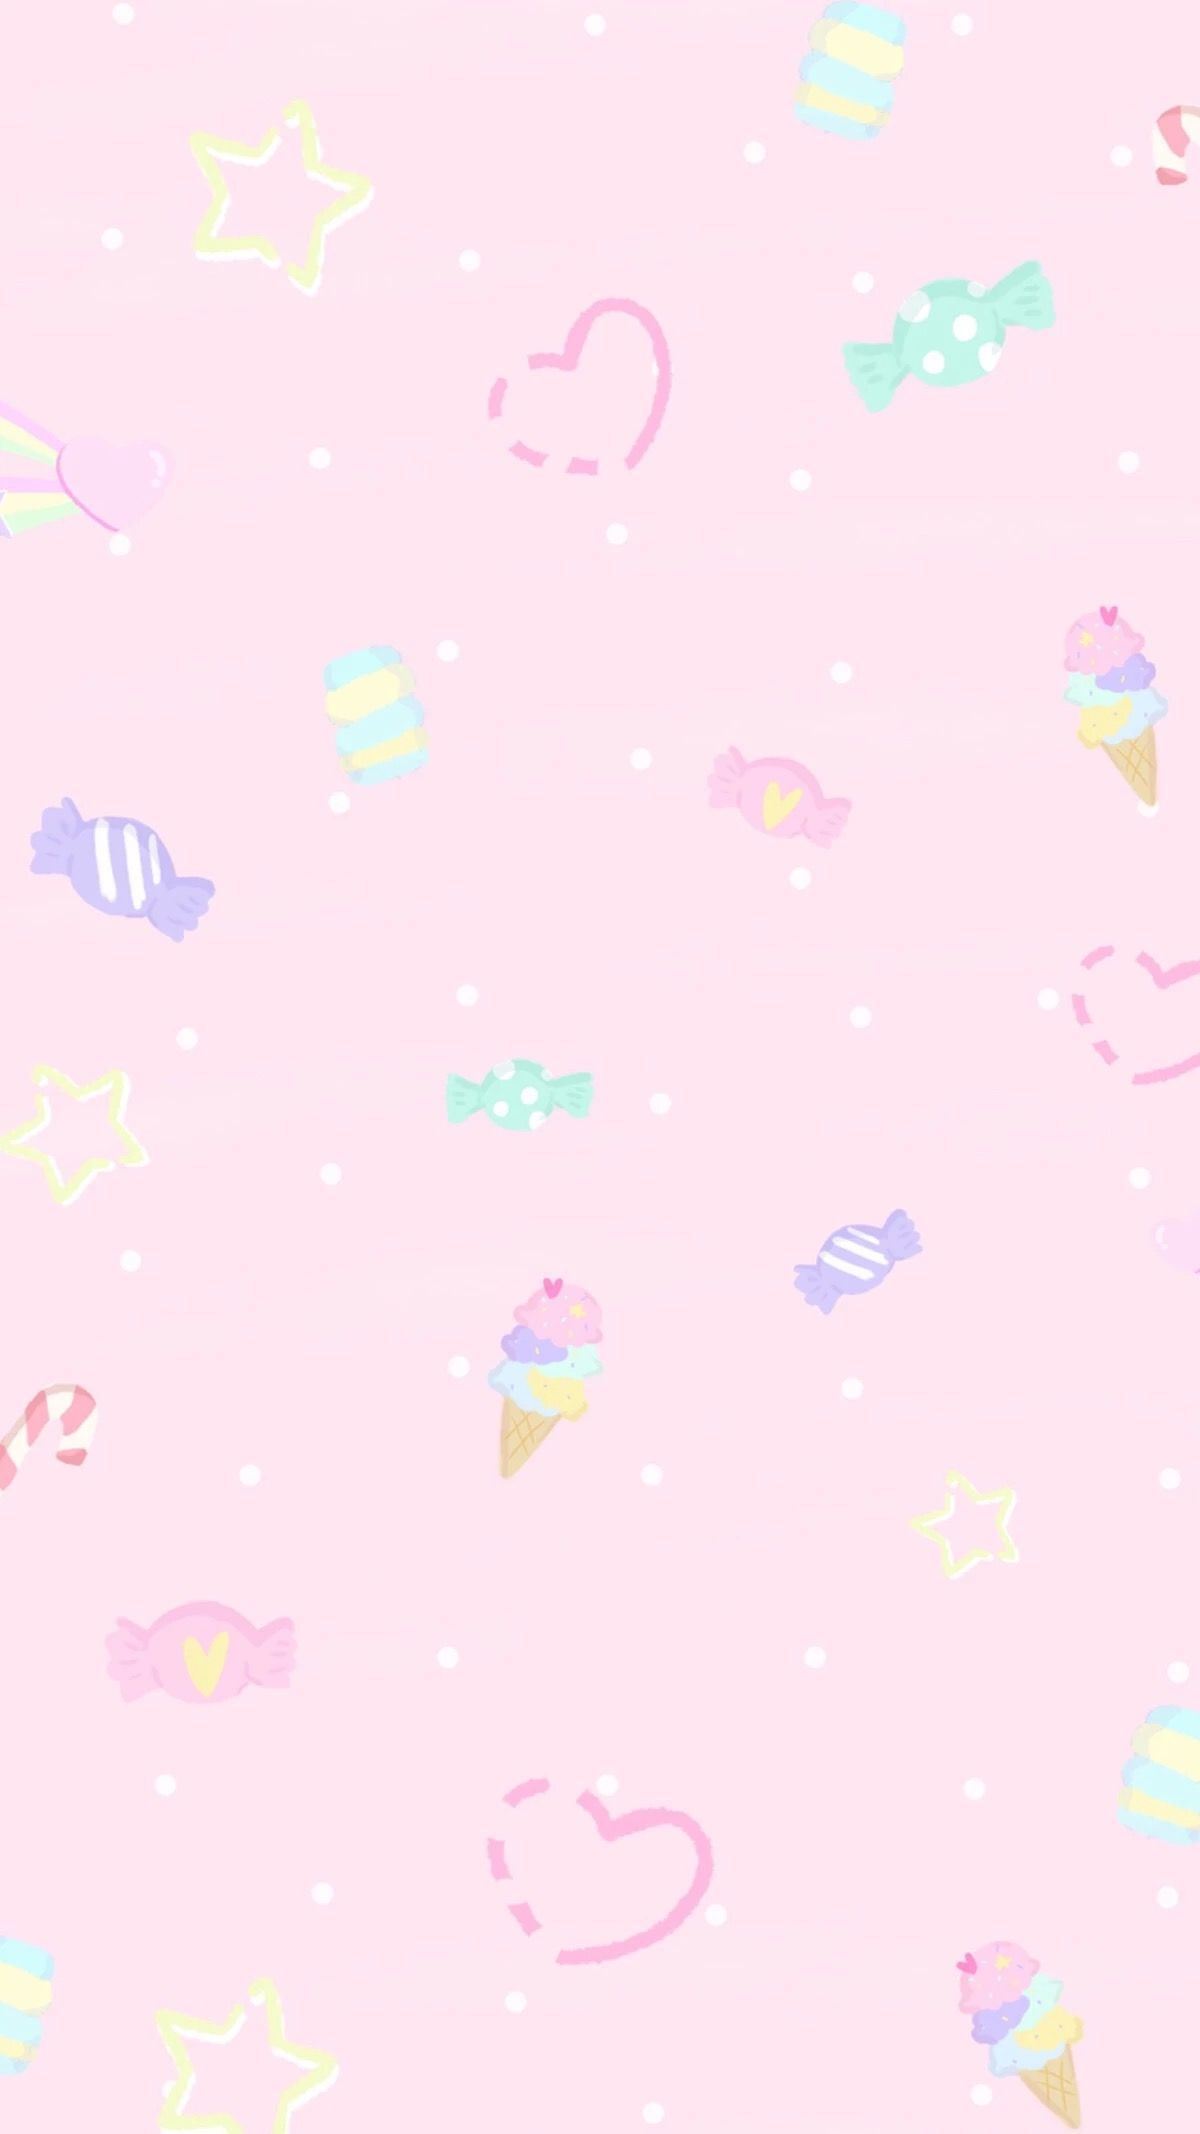 25 Outstanding Kawaii Pastel Pink Aesthetic Wallpaper You Can Save It At No Cost Aesthetic Arena